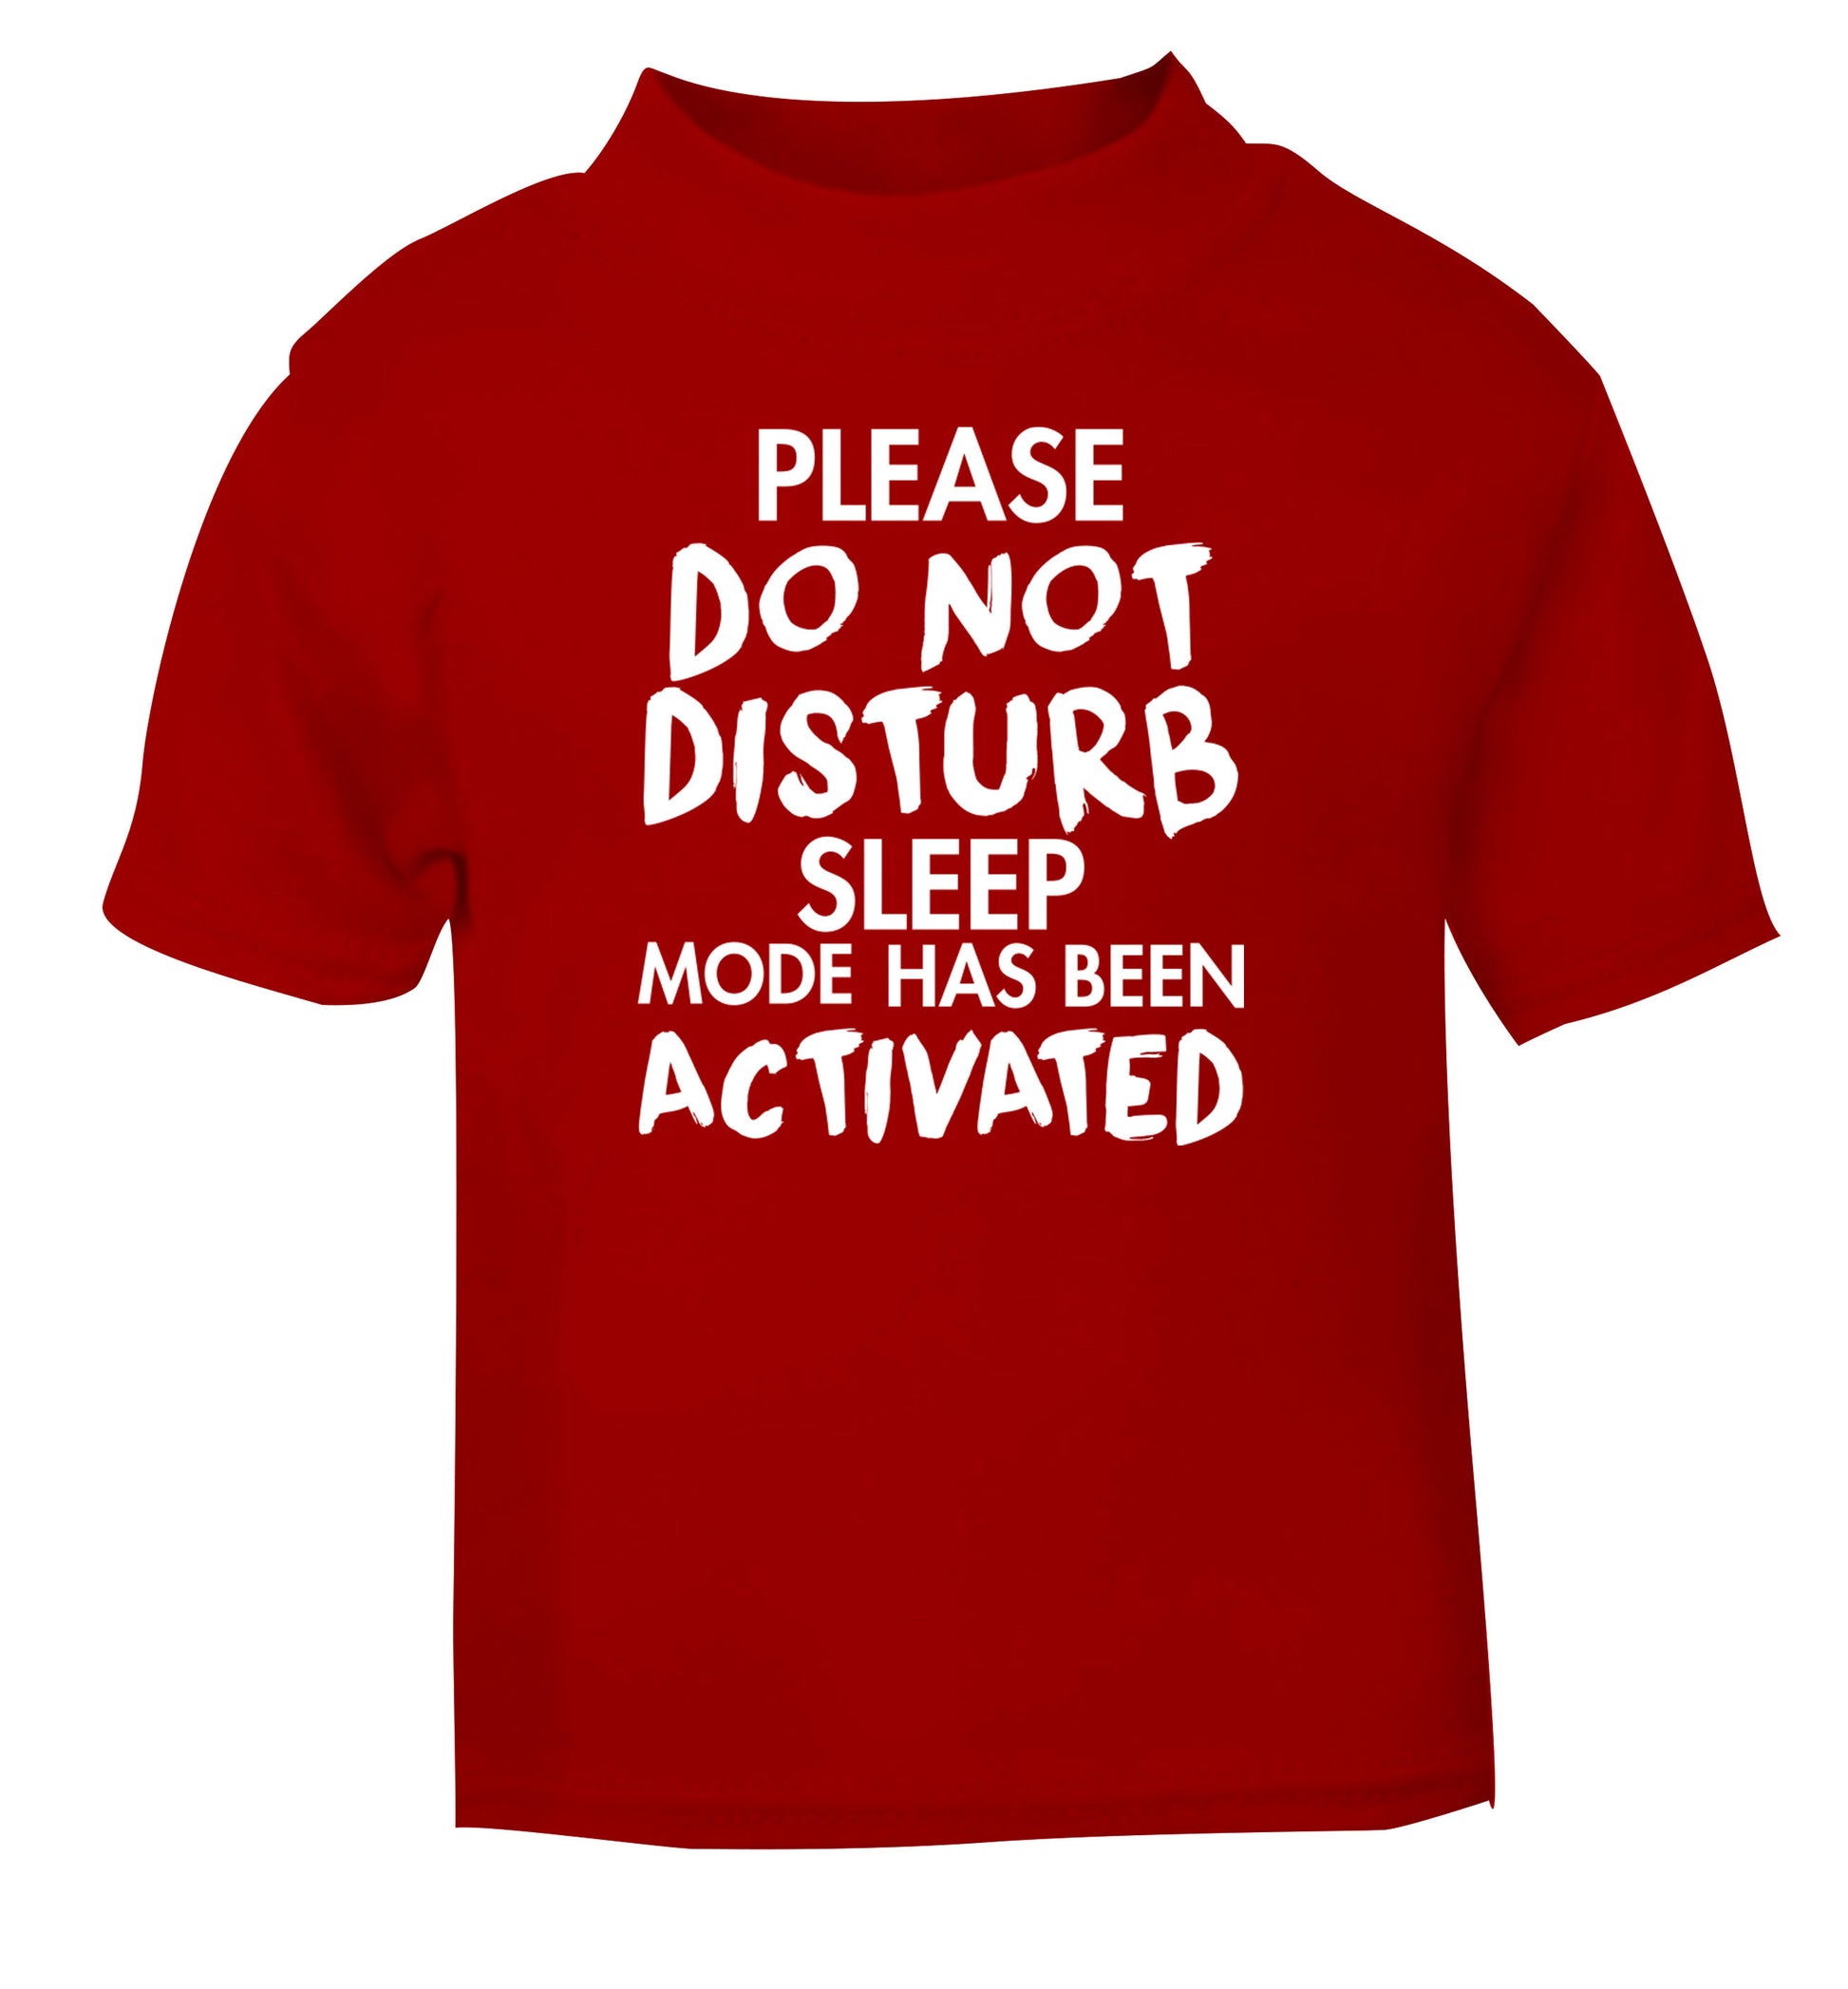 Please do not disturb sleeping mode has been activated red Baby Toddler Tshirt 2 Years